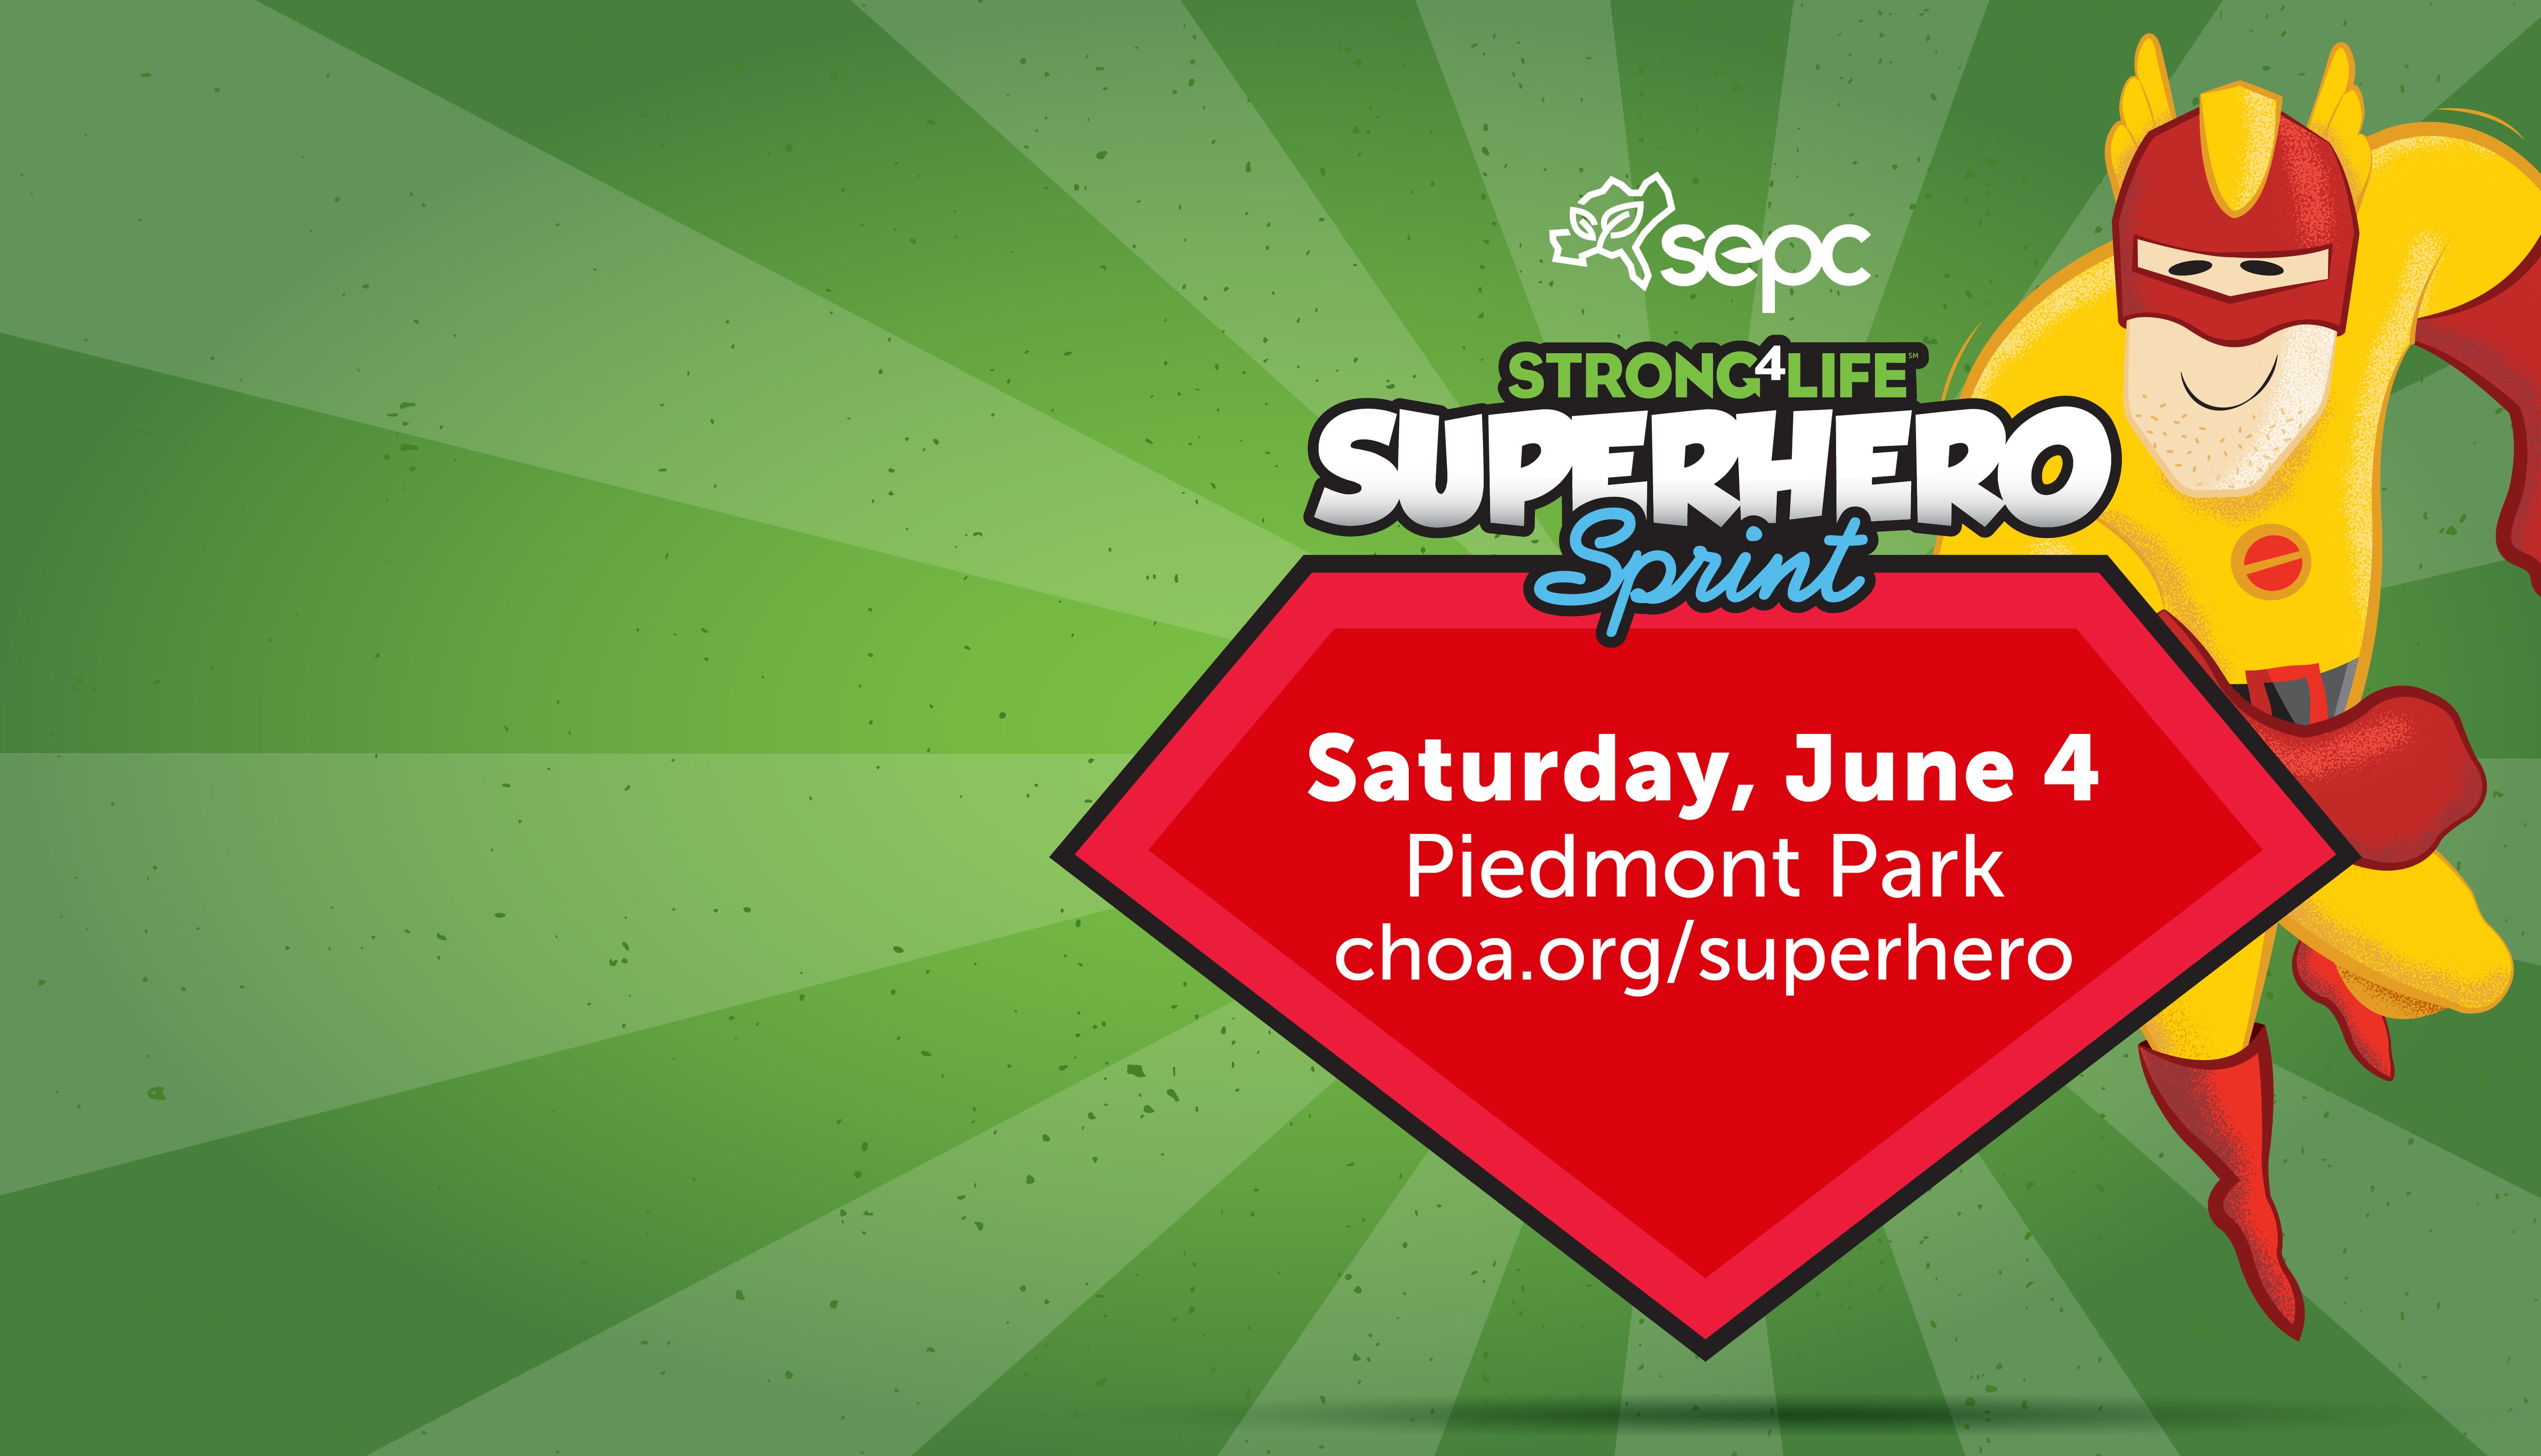 Join us for the Superhero Sprint 5k and one mile fun-run benefiting Children's Healthcare of Atlanta